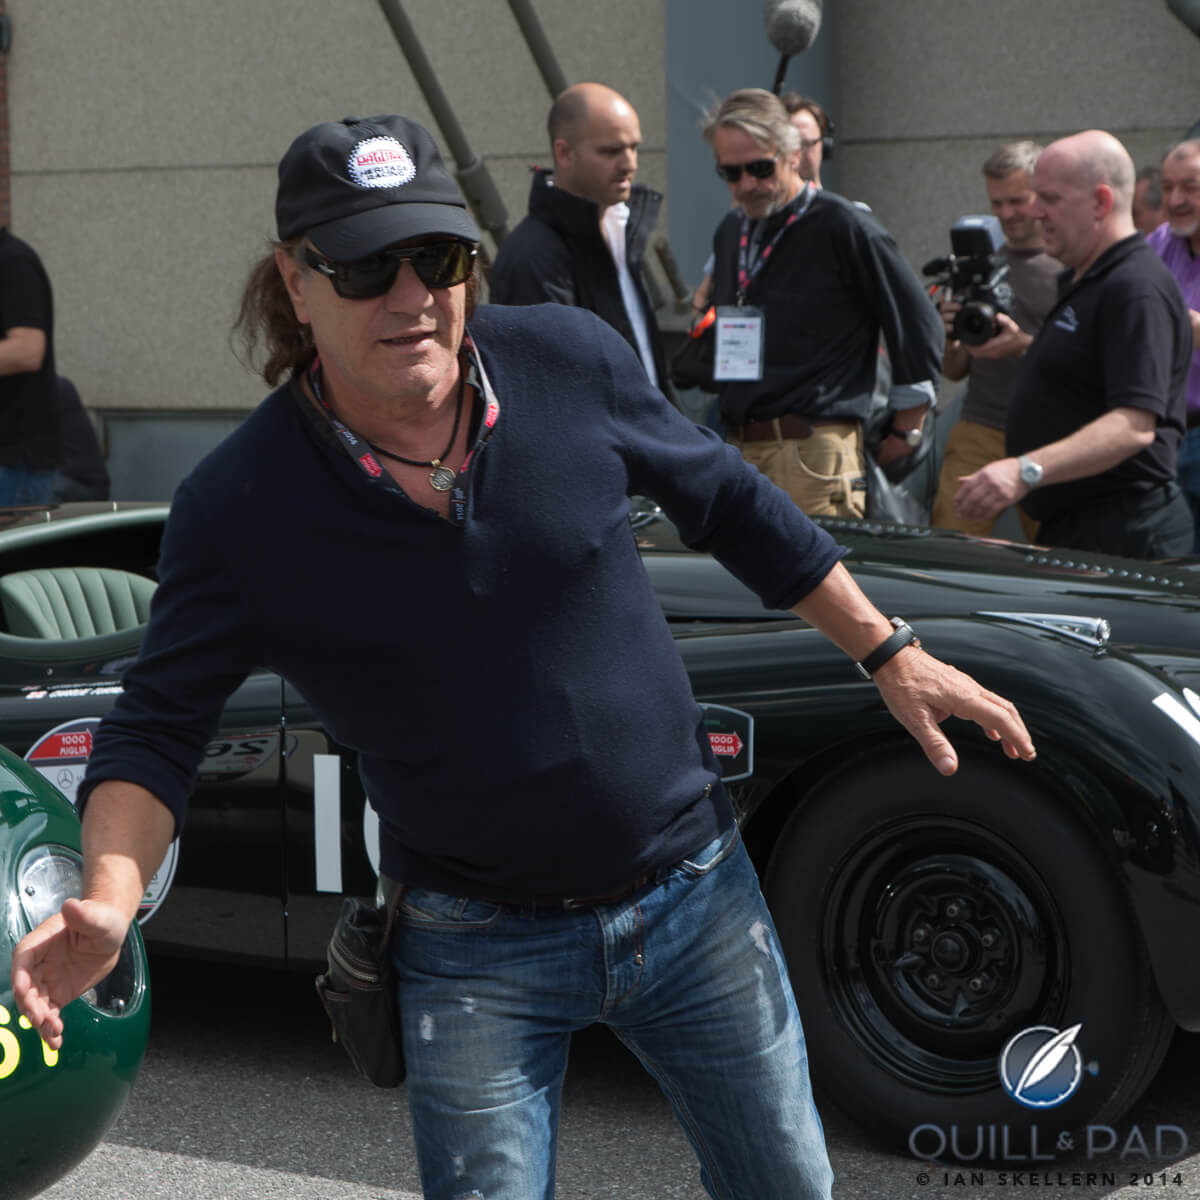 AC/DC signer Brian Johnson hamming up for the camera before checking out theJaguar C-type he will be driving in the Mille Miglia